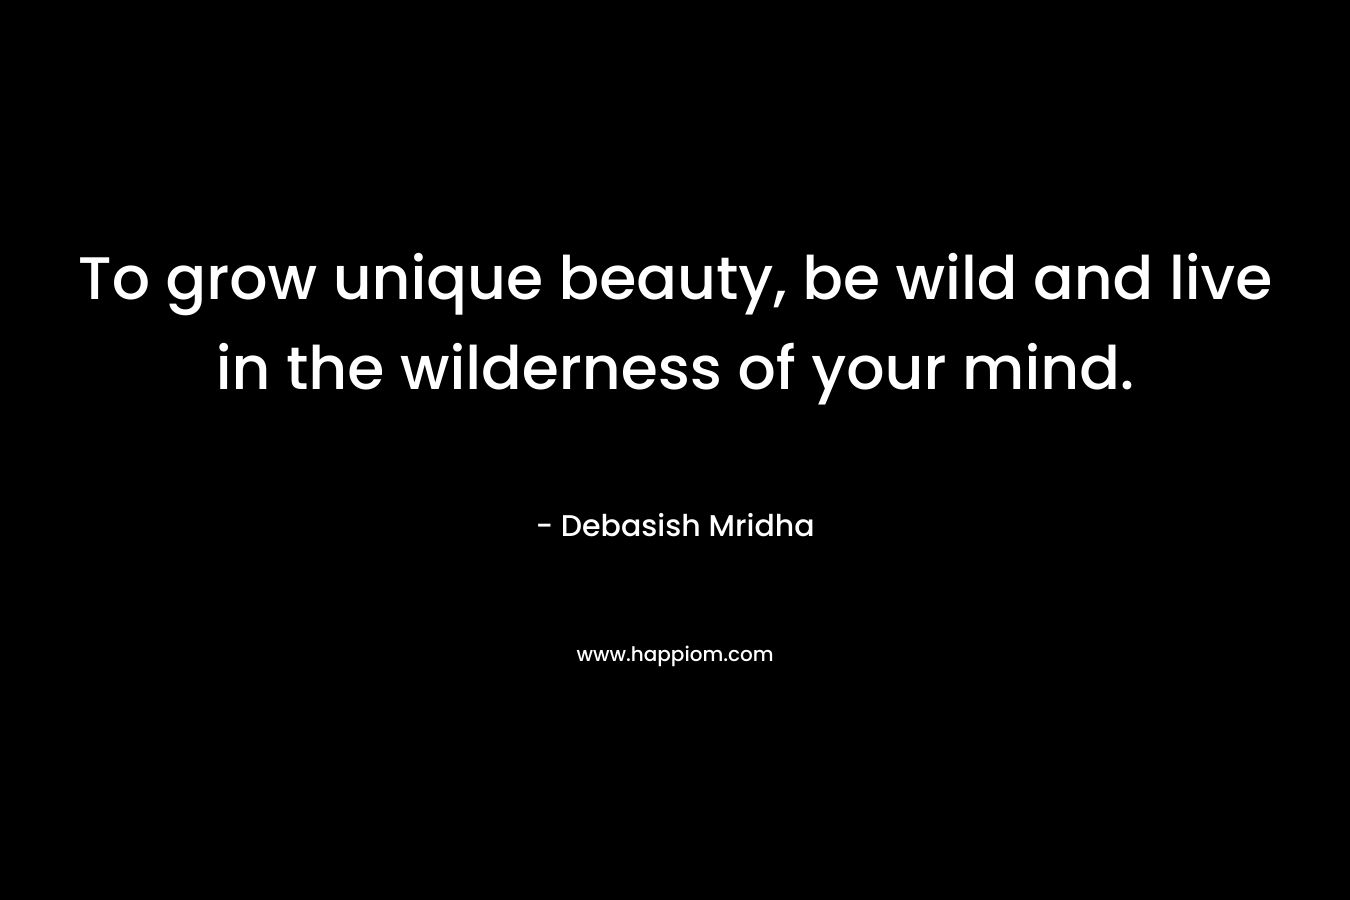 To grow unique beauty, be wild and live in the wilderness of your mind.